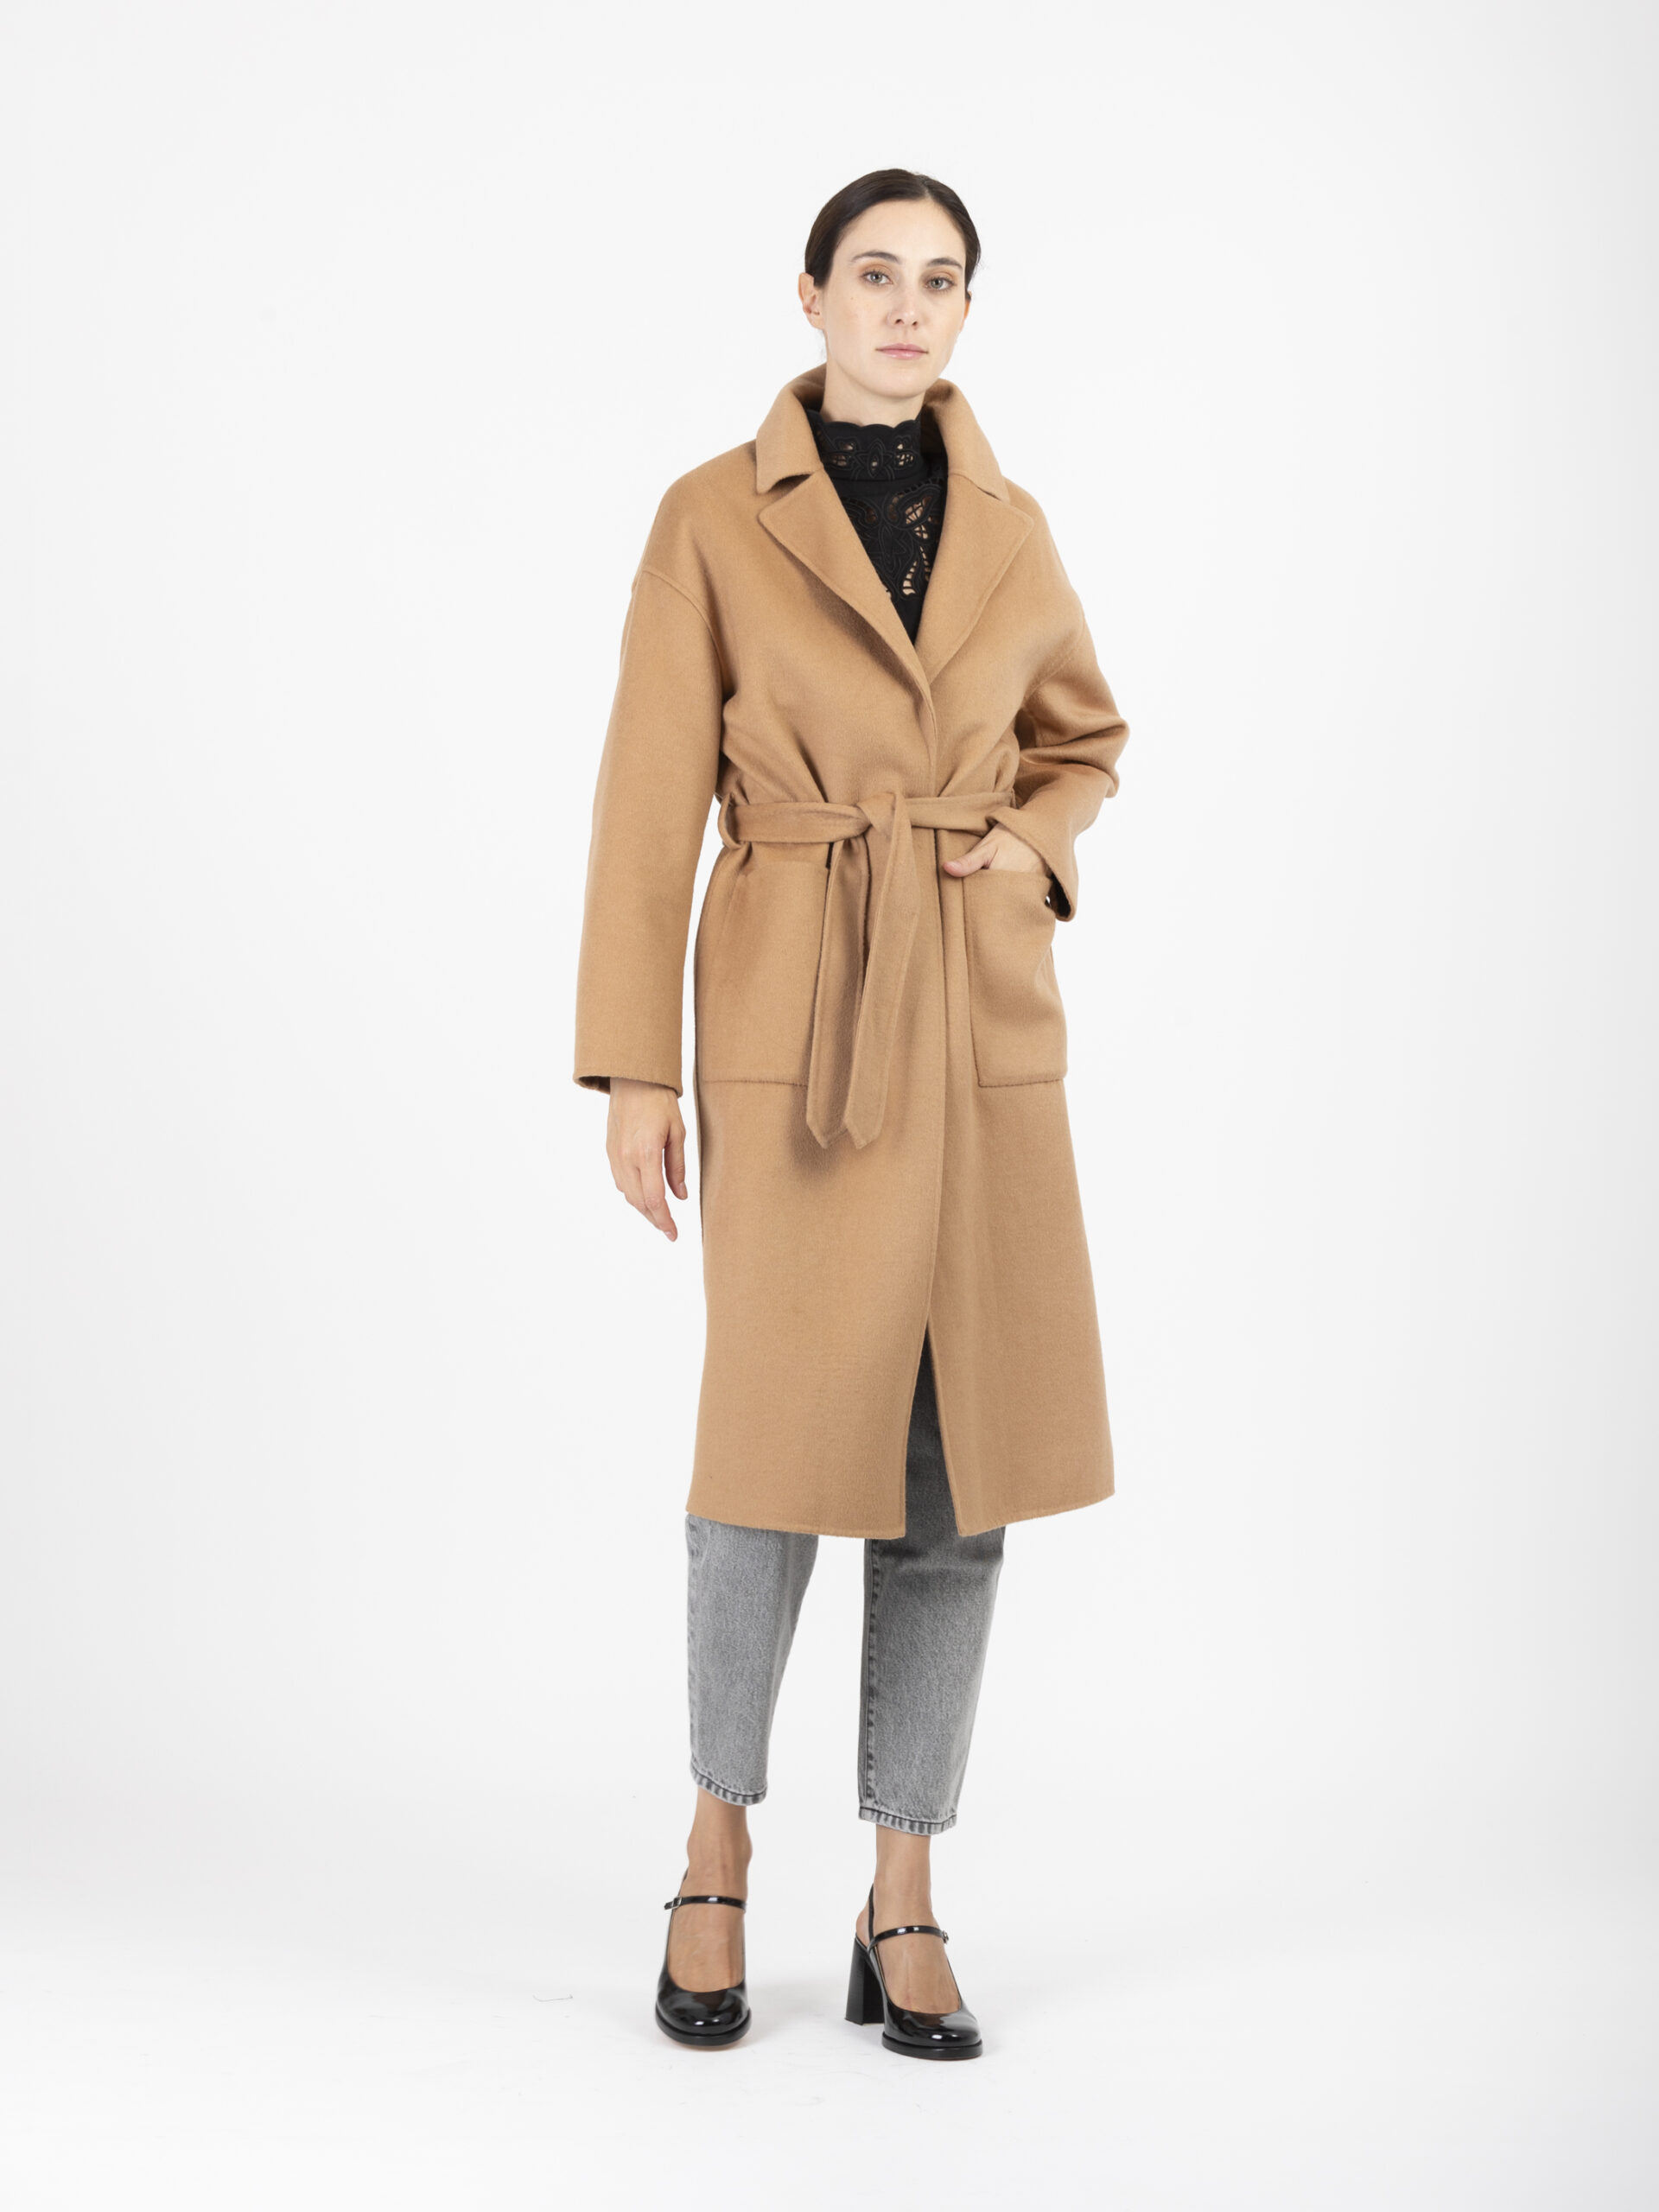 matinal-camel-wool-coat-trench-lapetitefrancaise-matchbox